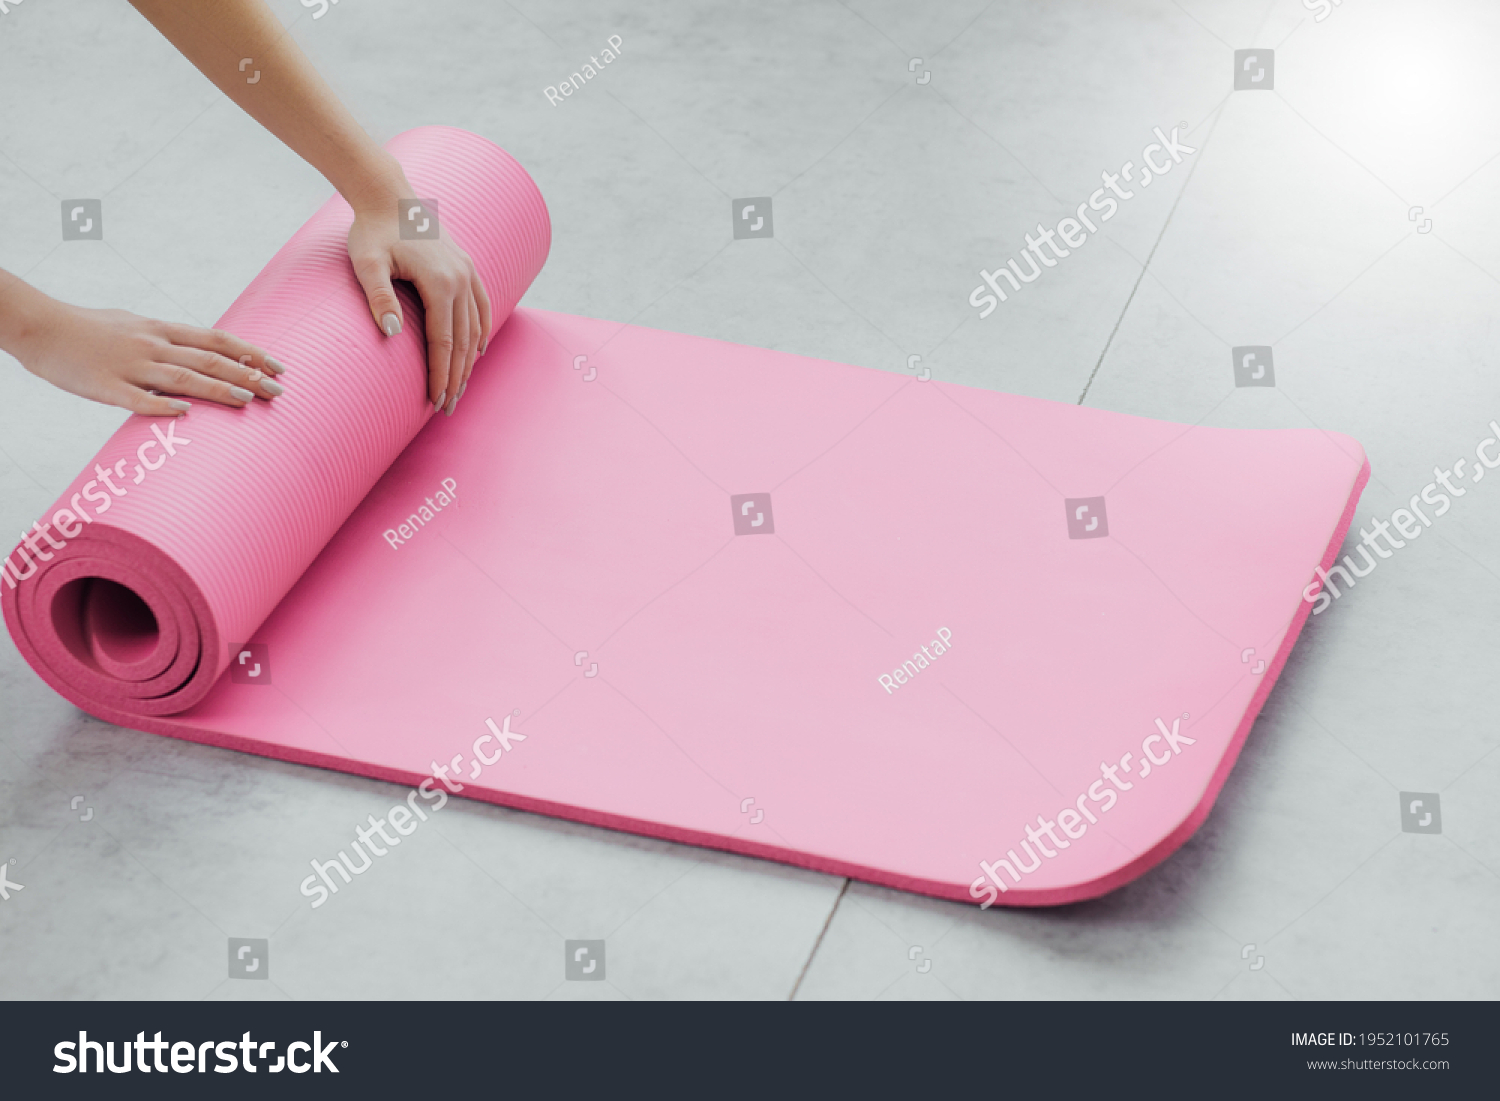 Time for meditation, fitness session, well-being concept. Girl wearing grey sporty pants rolling fitness mat before, after class in yoga studio club or at home on wooden floor. Hands and legs close up #1952101765